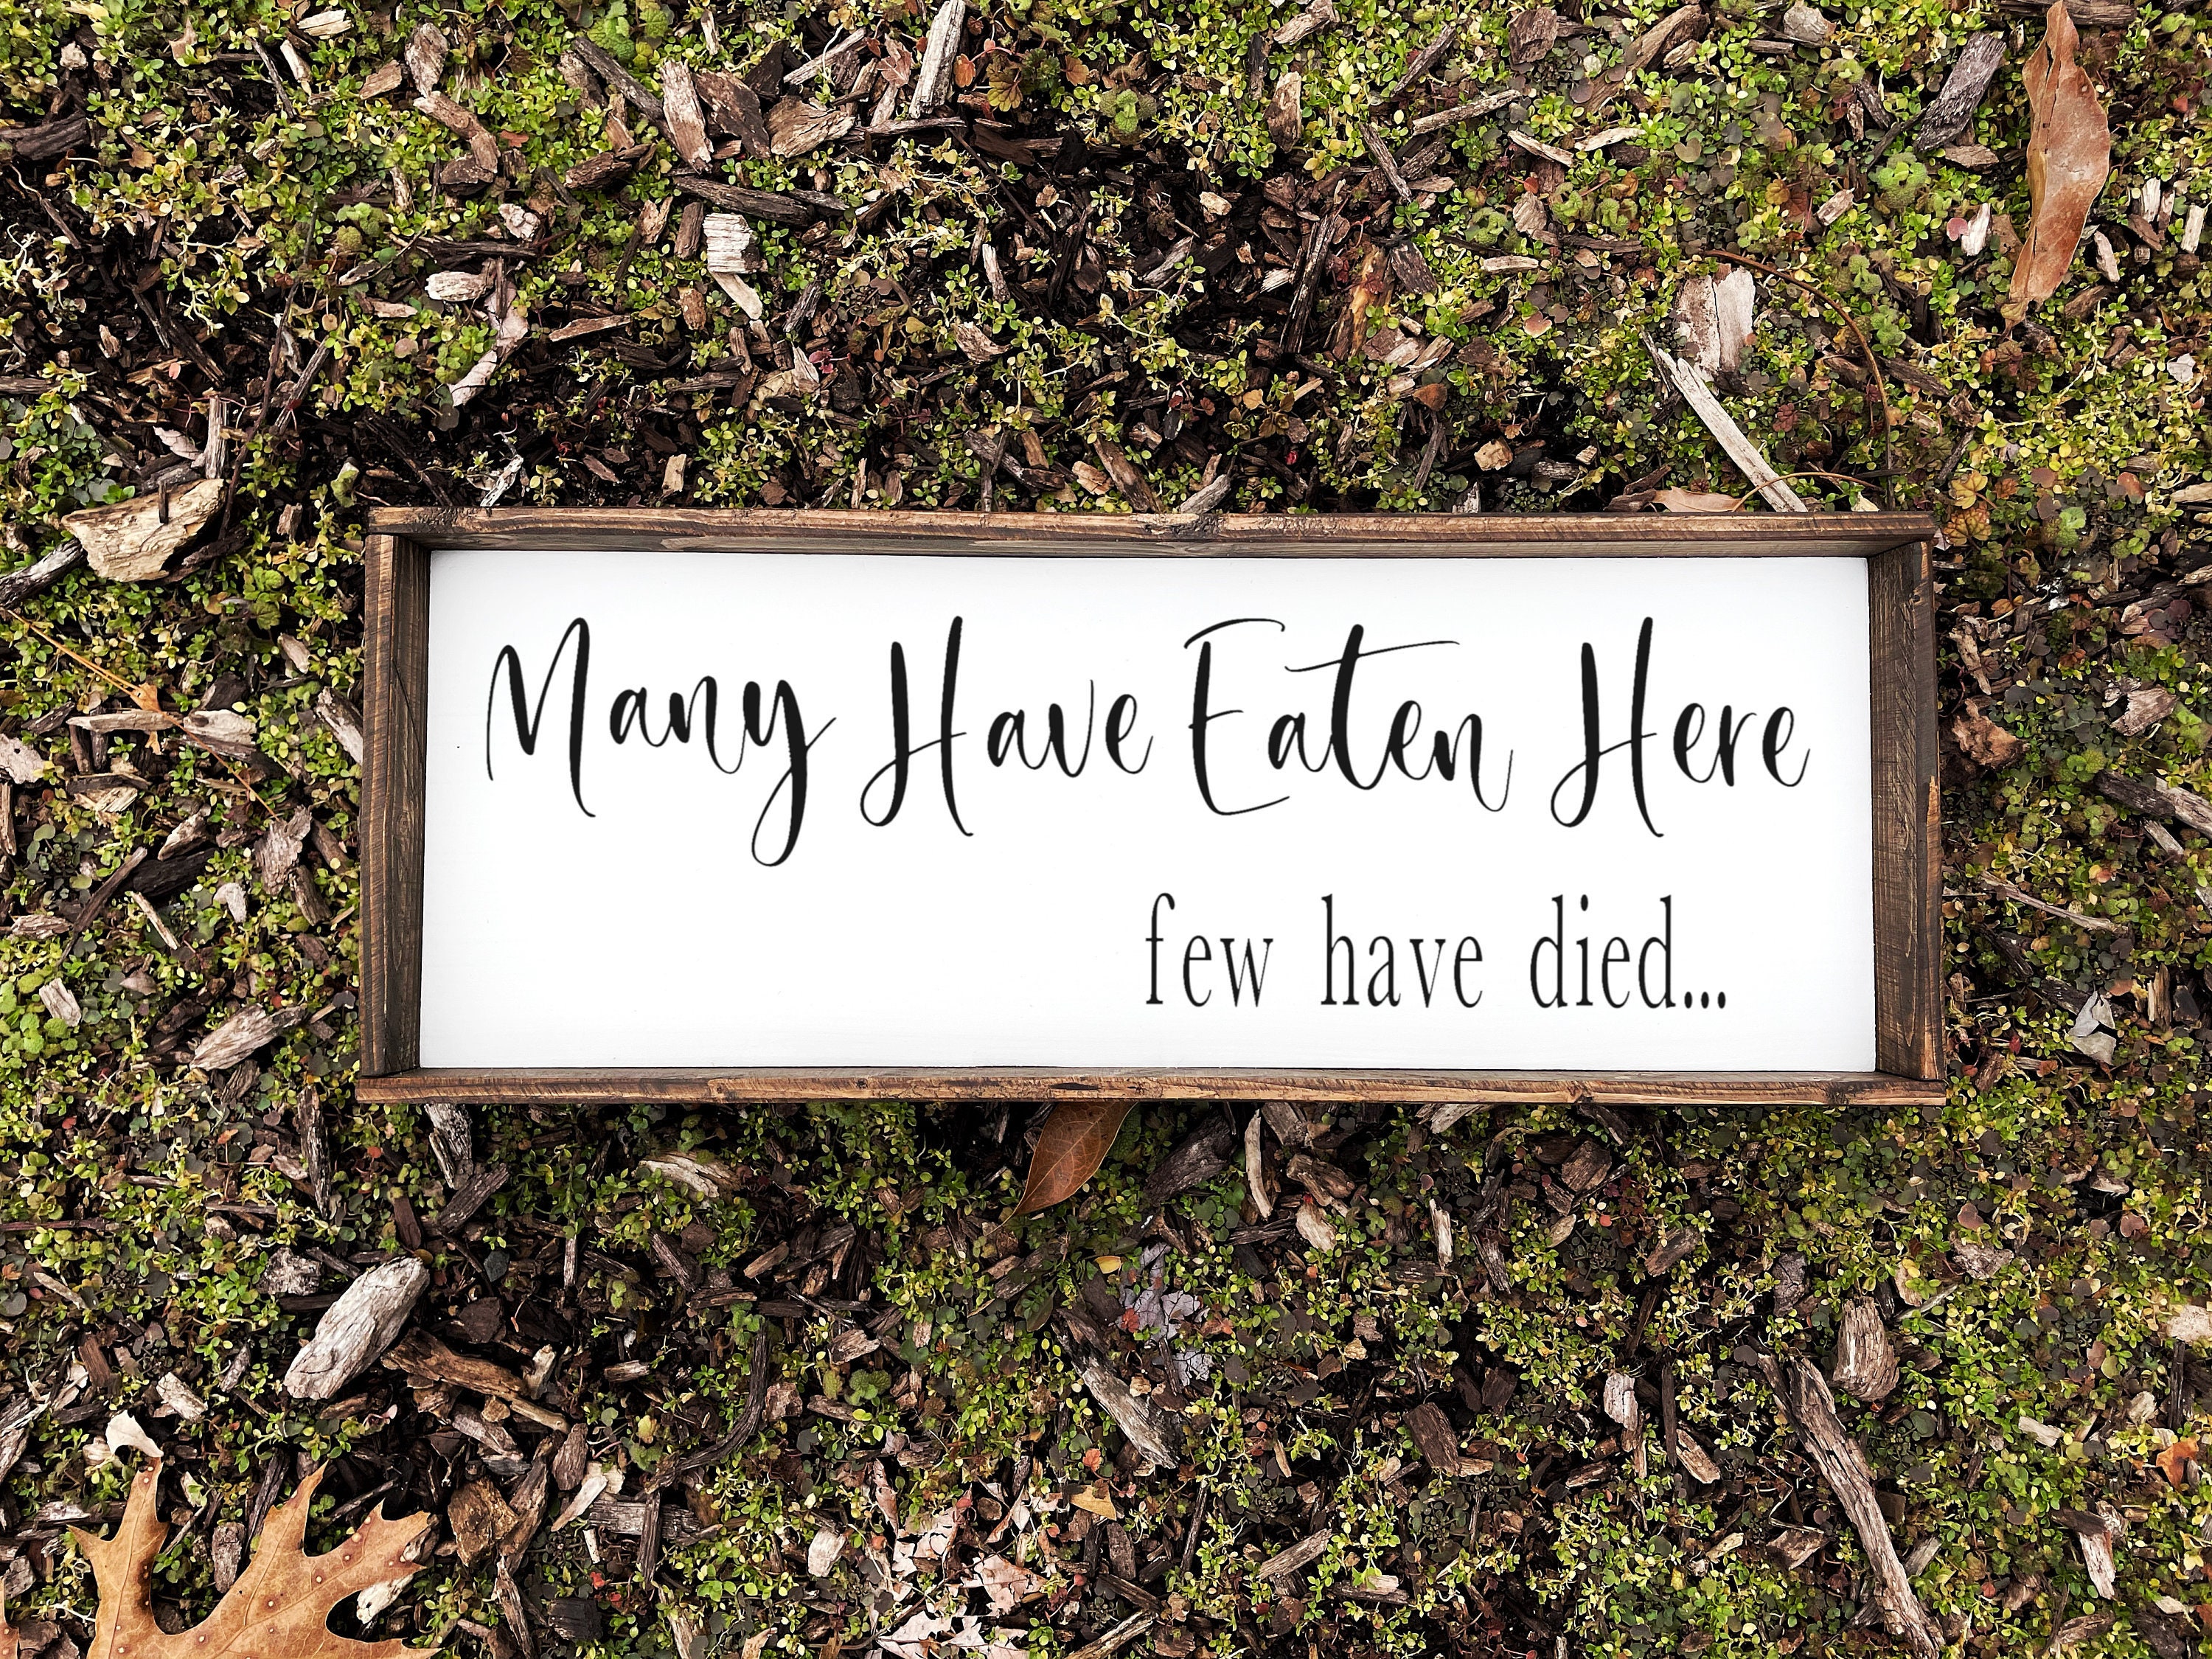 Many Have Eaten Few Have Died Sign - Funny Kitchen Signs - Funny Kitchen  Decor - Home Decor Kitchen - Rustic Wall Decor 5 x 10 Inches